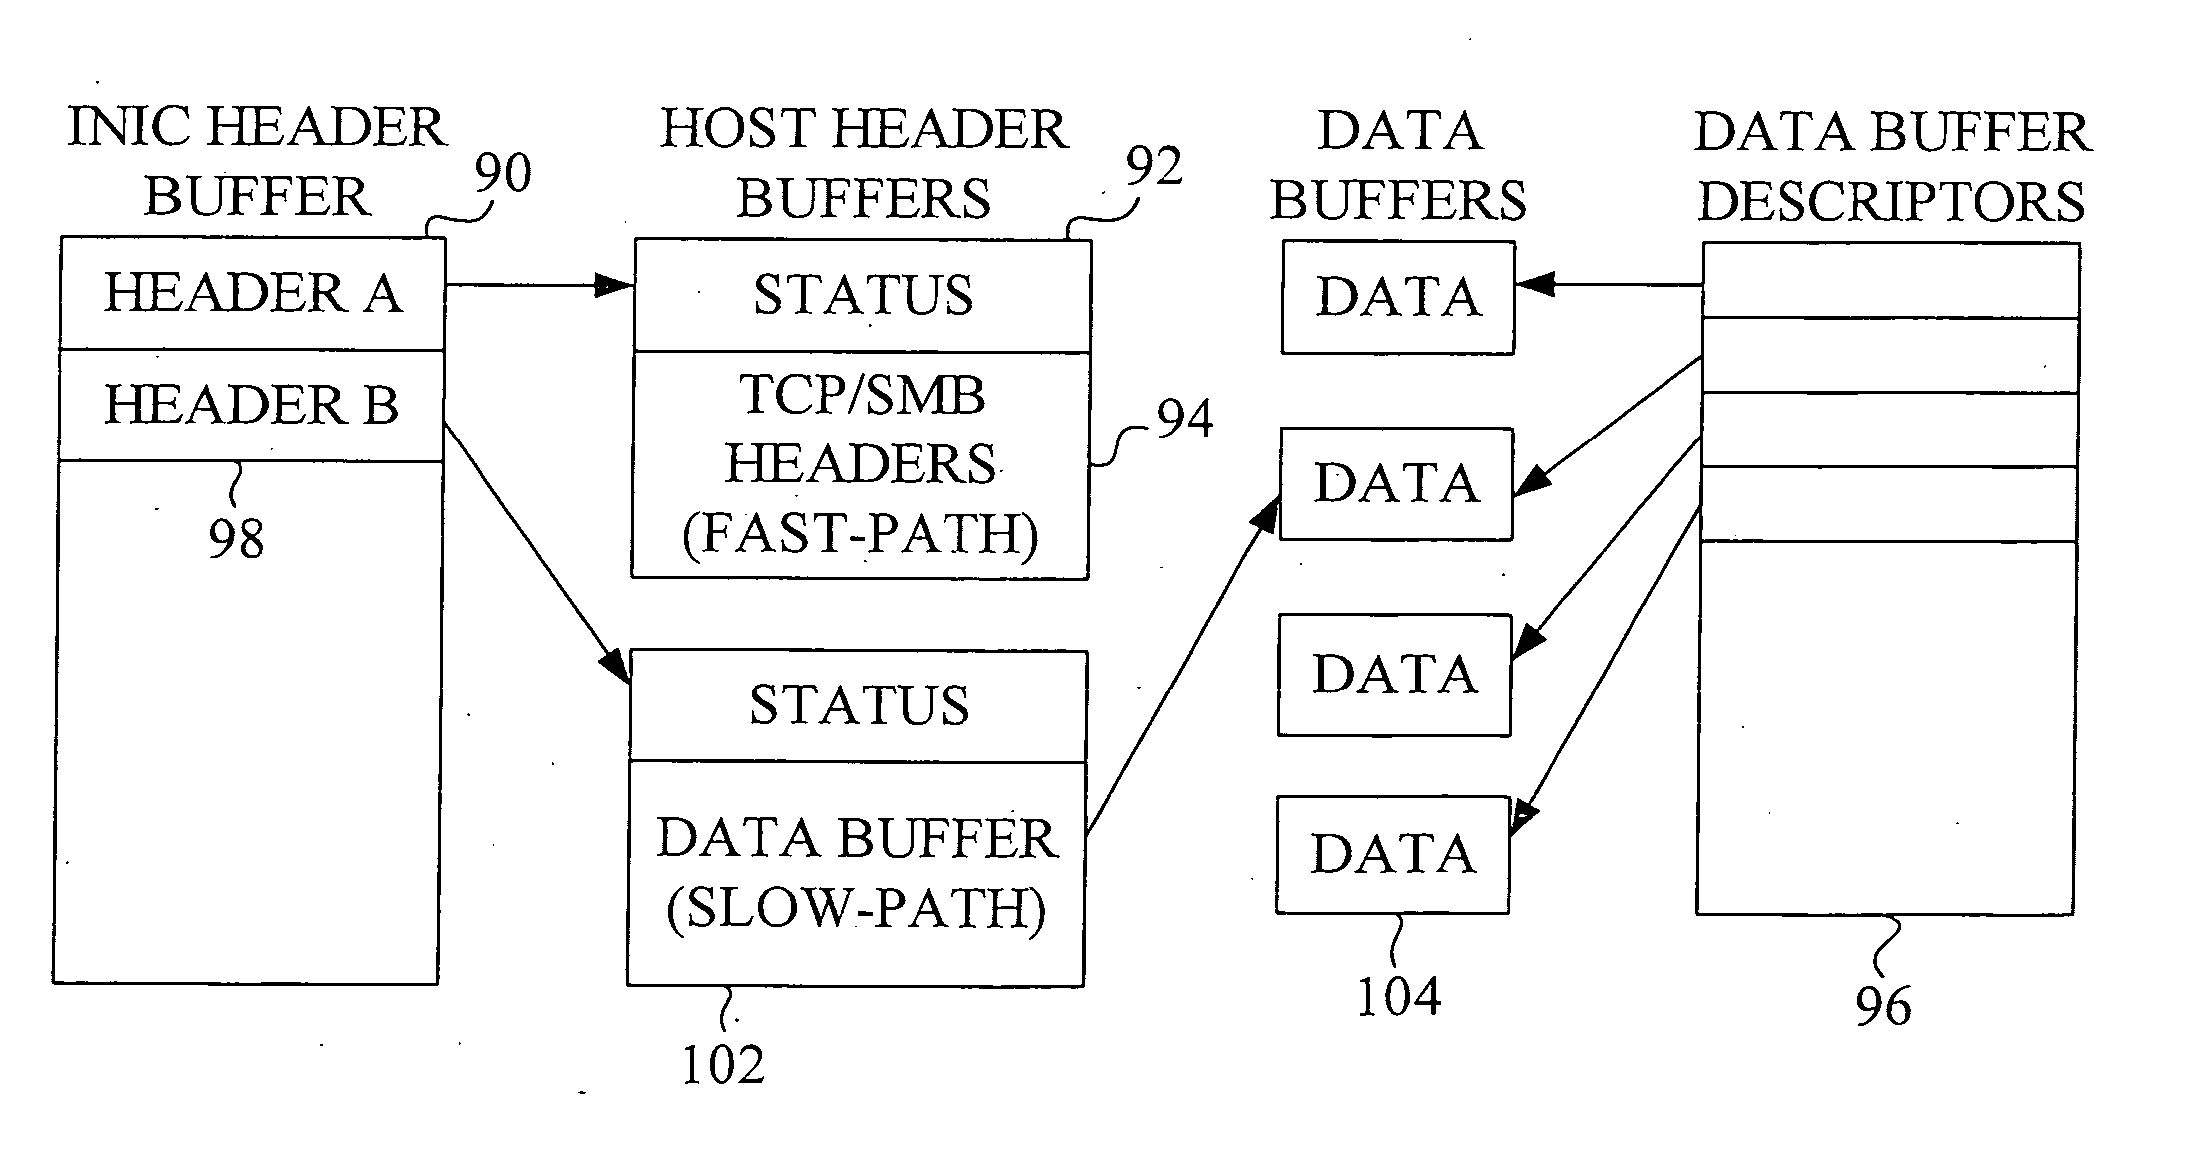 Network interface device that can transfer control of a TCP connection to a host CPU